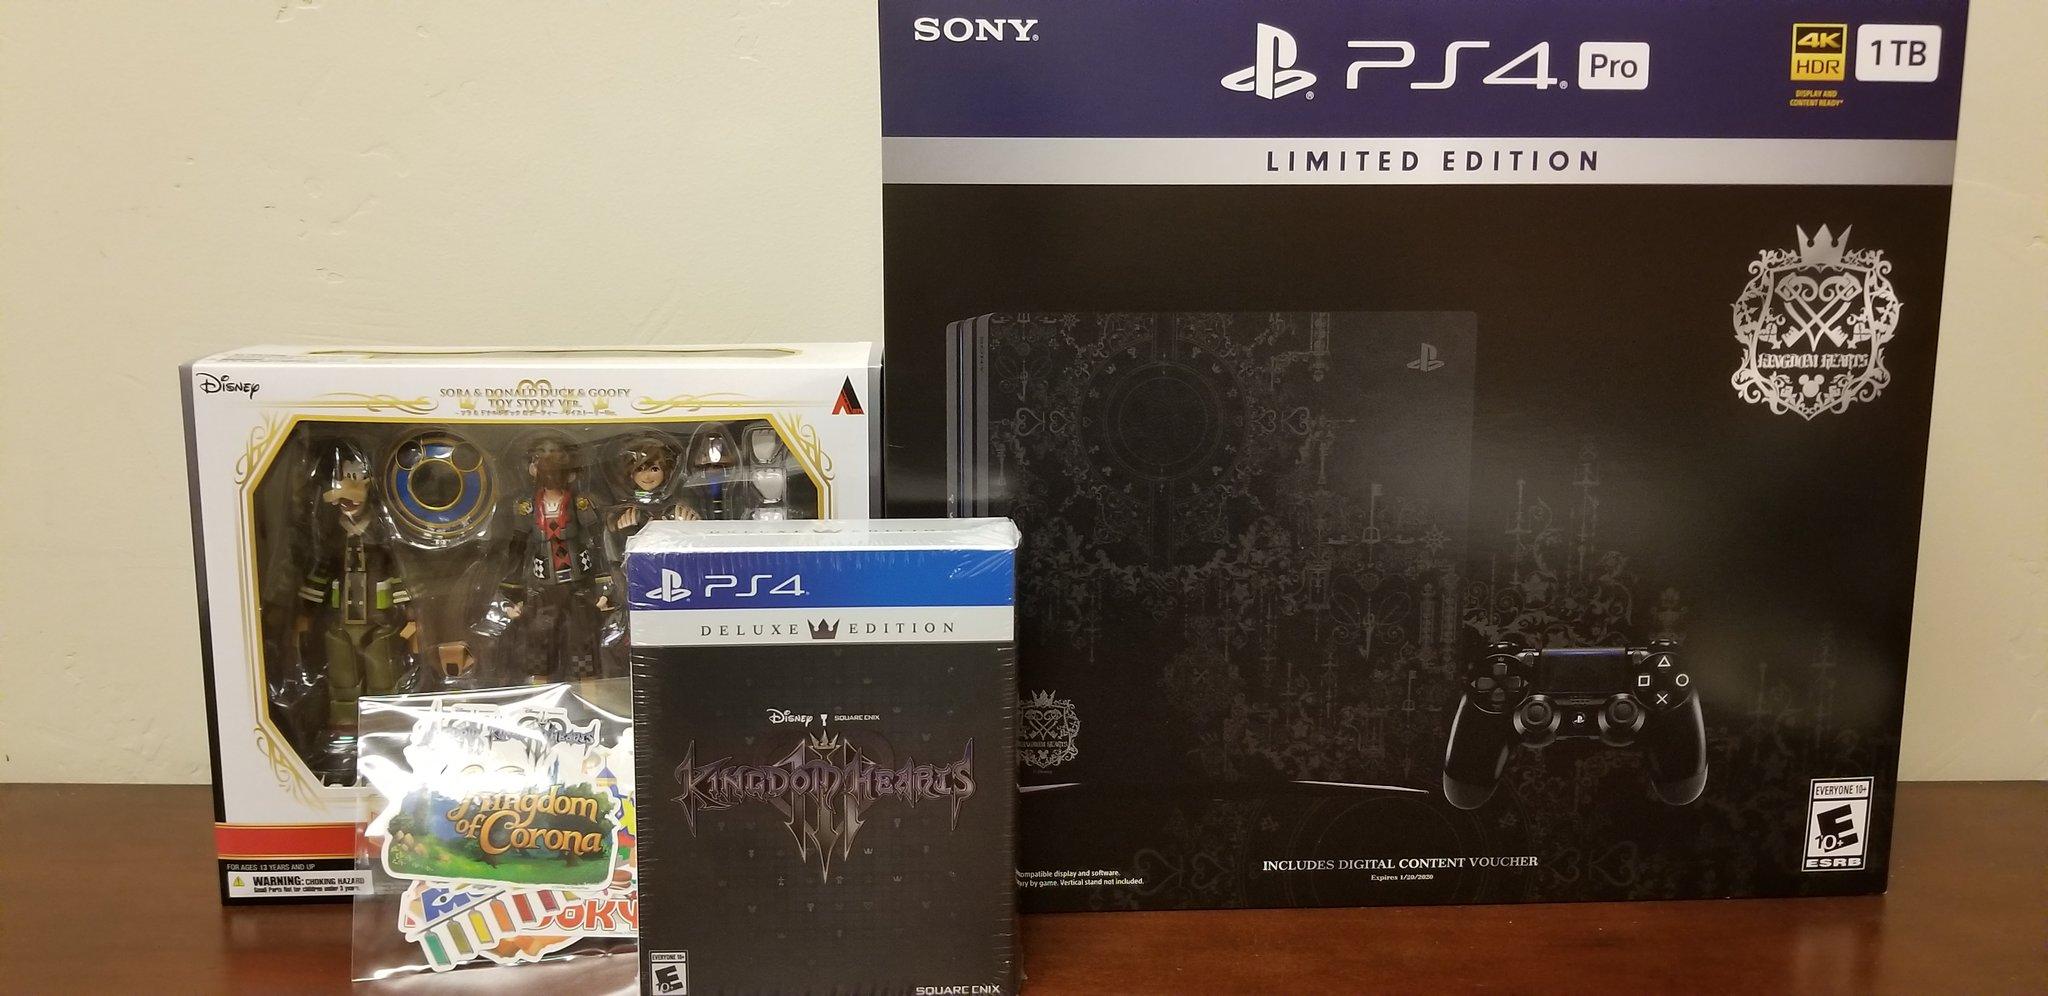 Unboxing Of Kingdom Hearts Iii Deluxe Edition Toy Story Bring Arts Figures And Kingdom Hearts Iii Playstation 4 Pro Kingdom Hearts News Kh13 For Kingdom Hearts